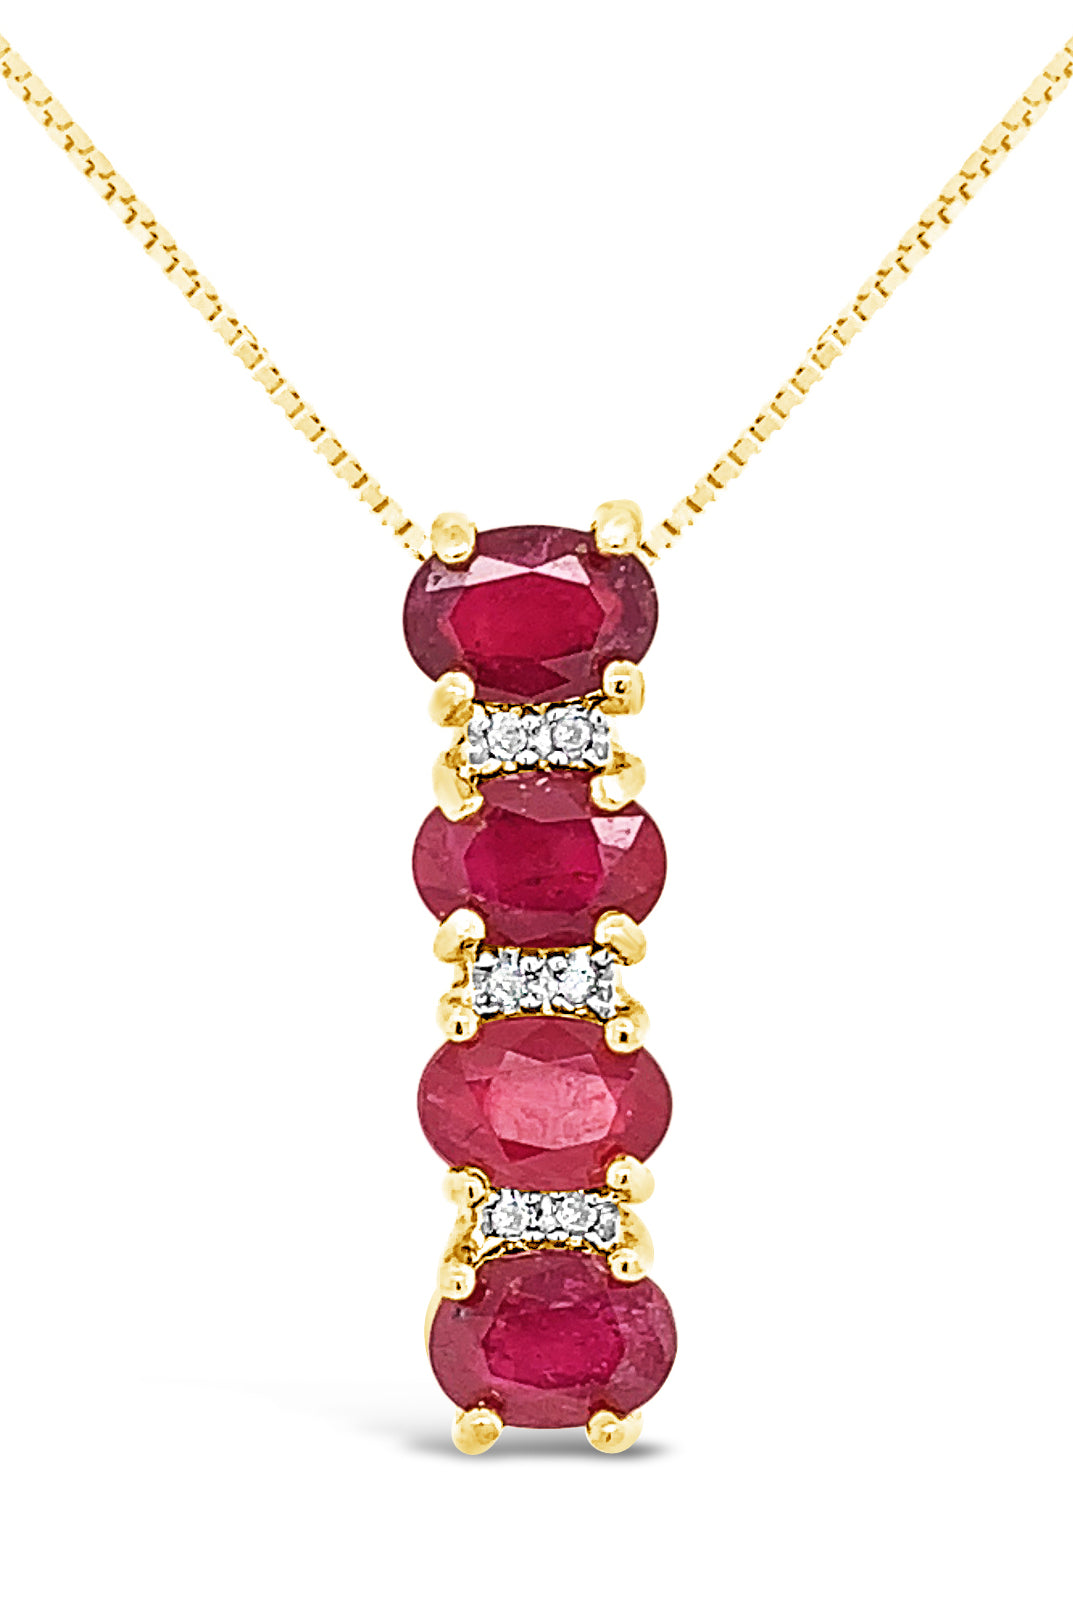 Rubies Diamonds Necklace Sterling Silver